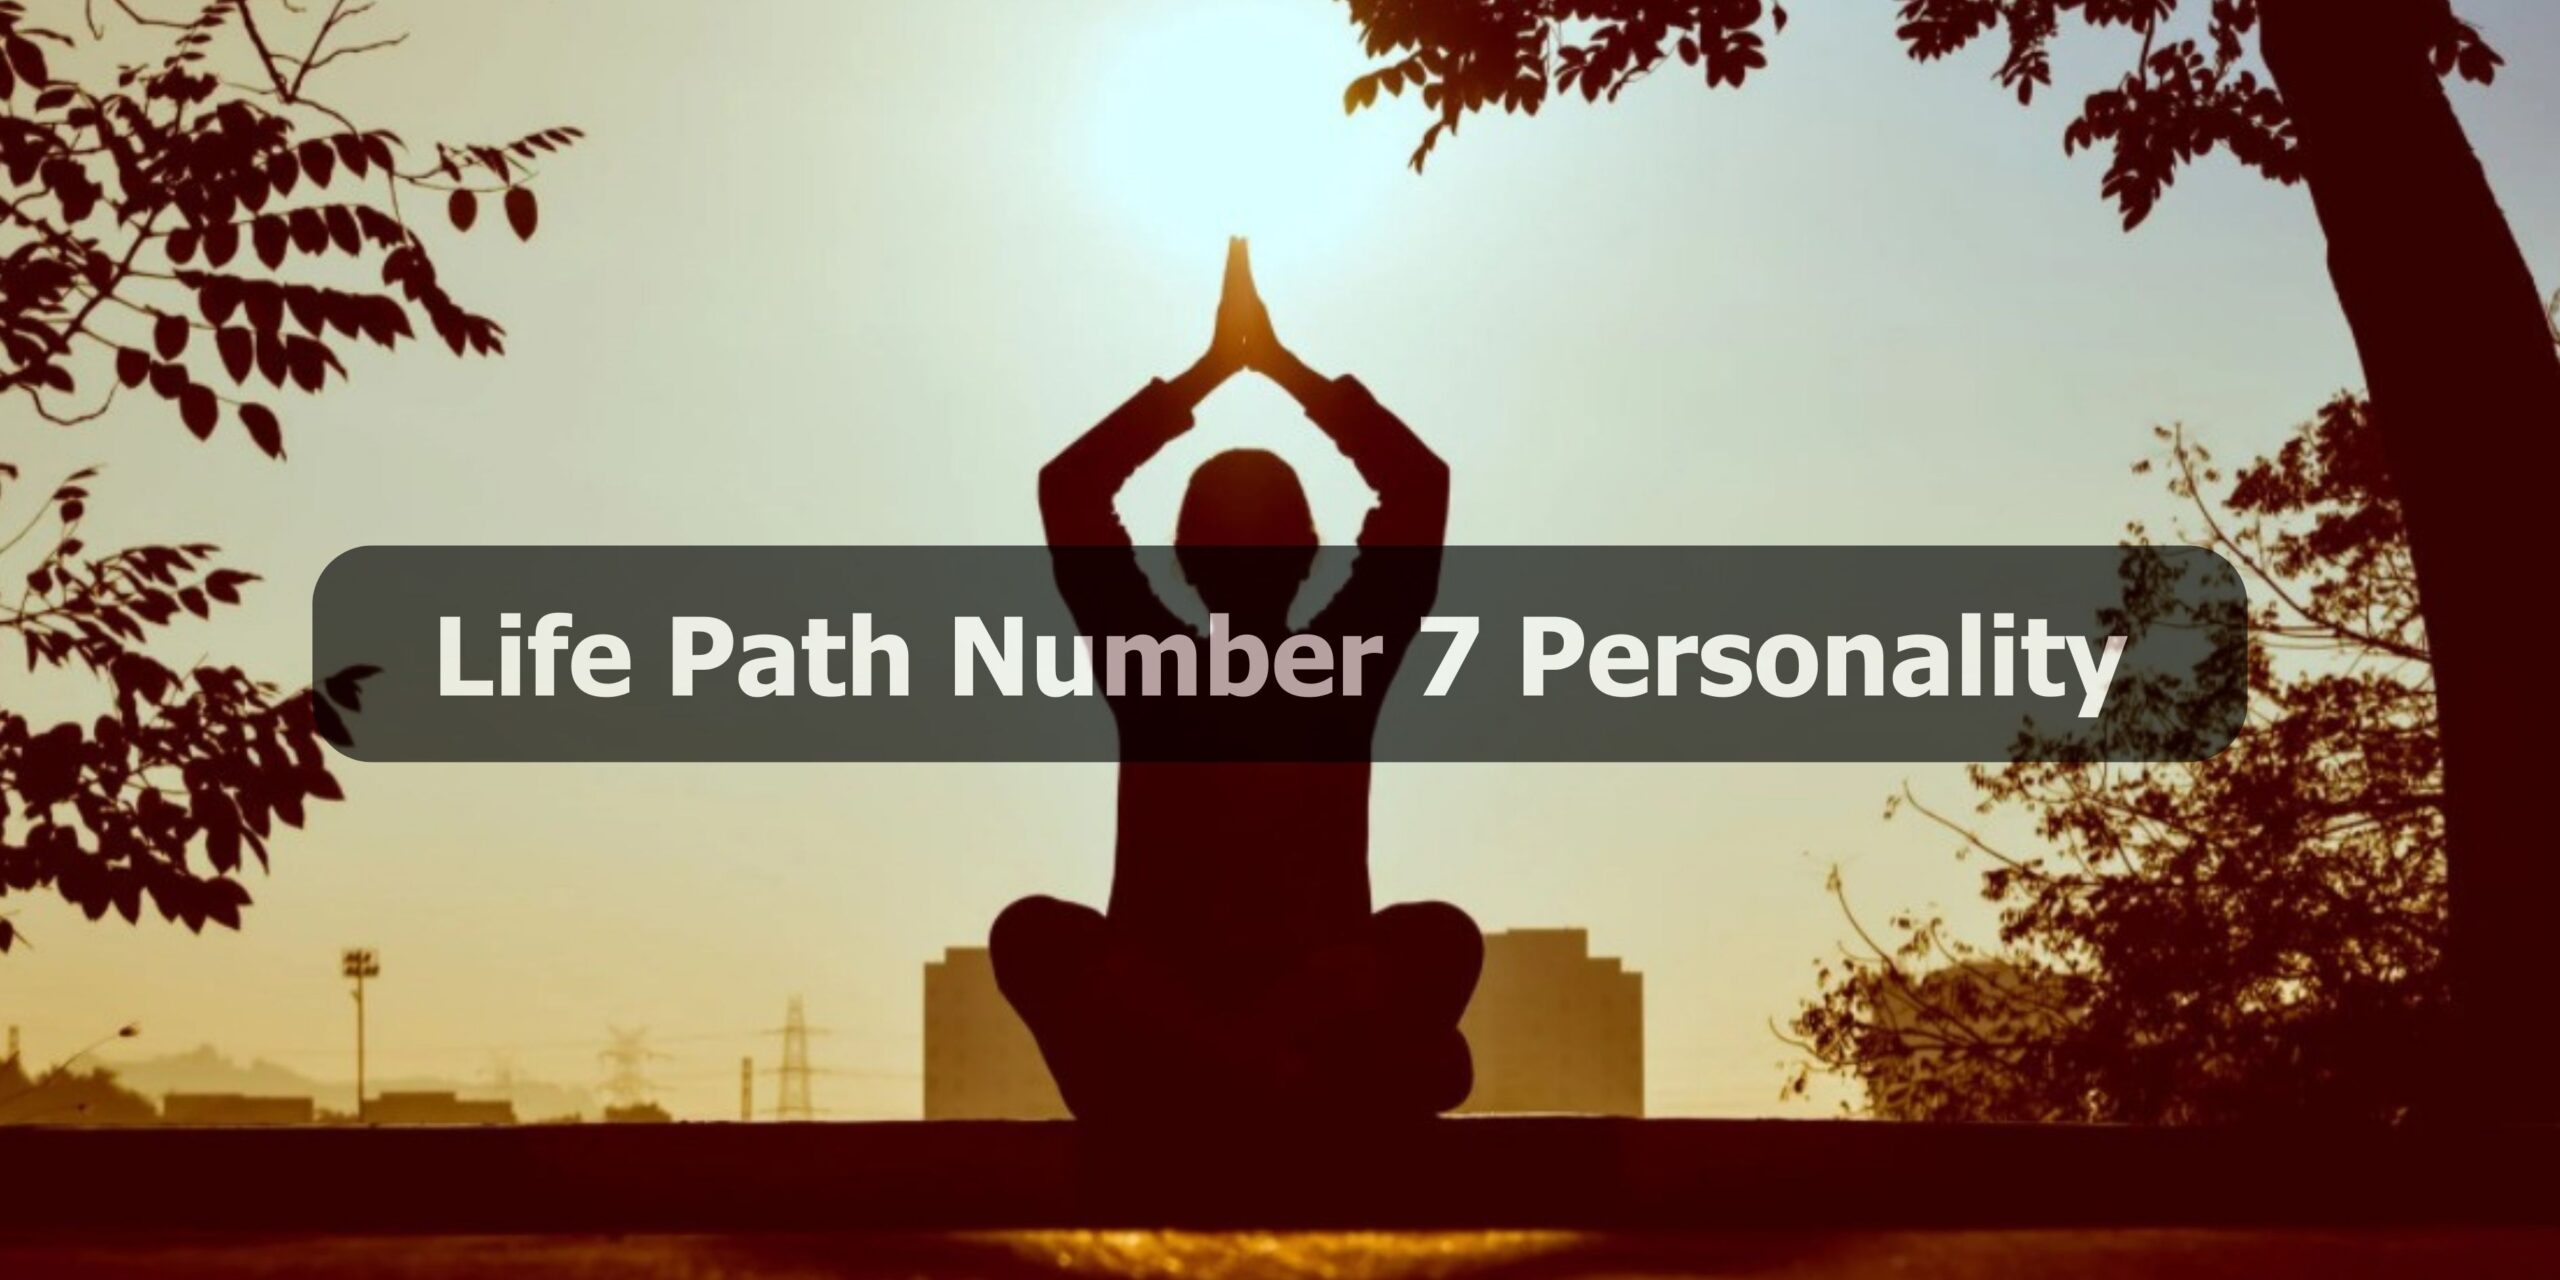 Life Path Number 7 Personality